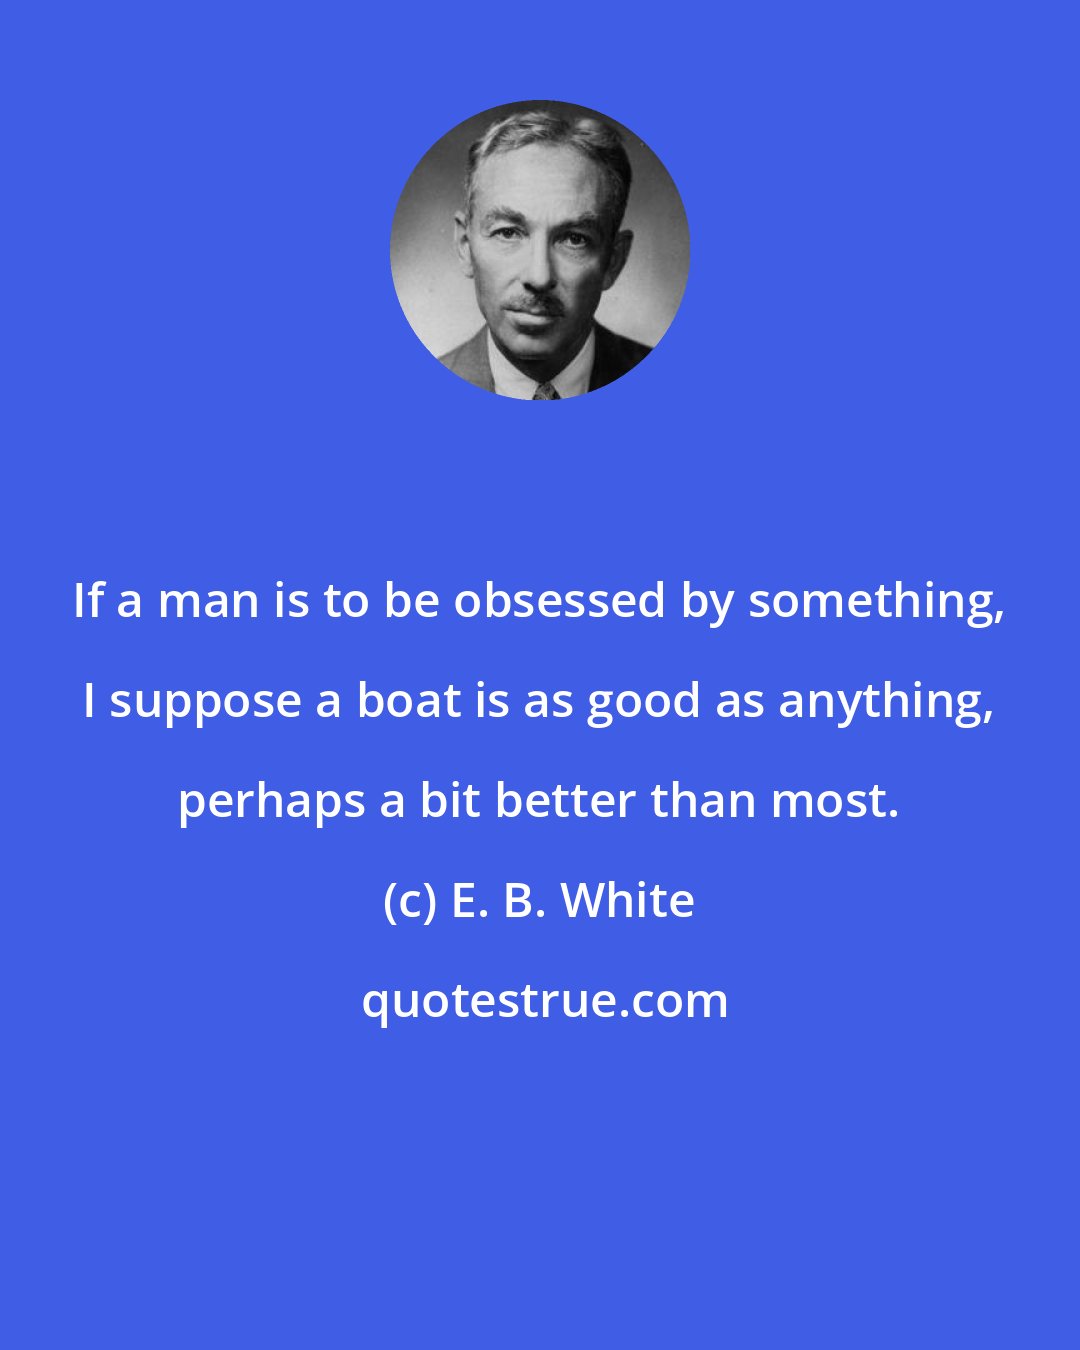 E. B. White: If a man is to be obsessed by something, I suppose a boat is as good as anything, perhaps a bit better than most.